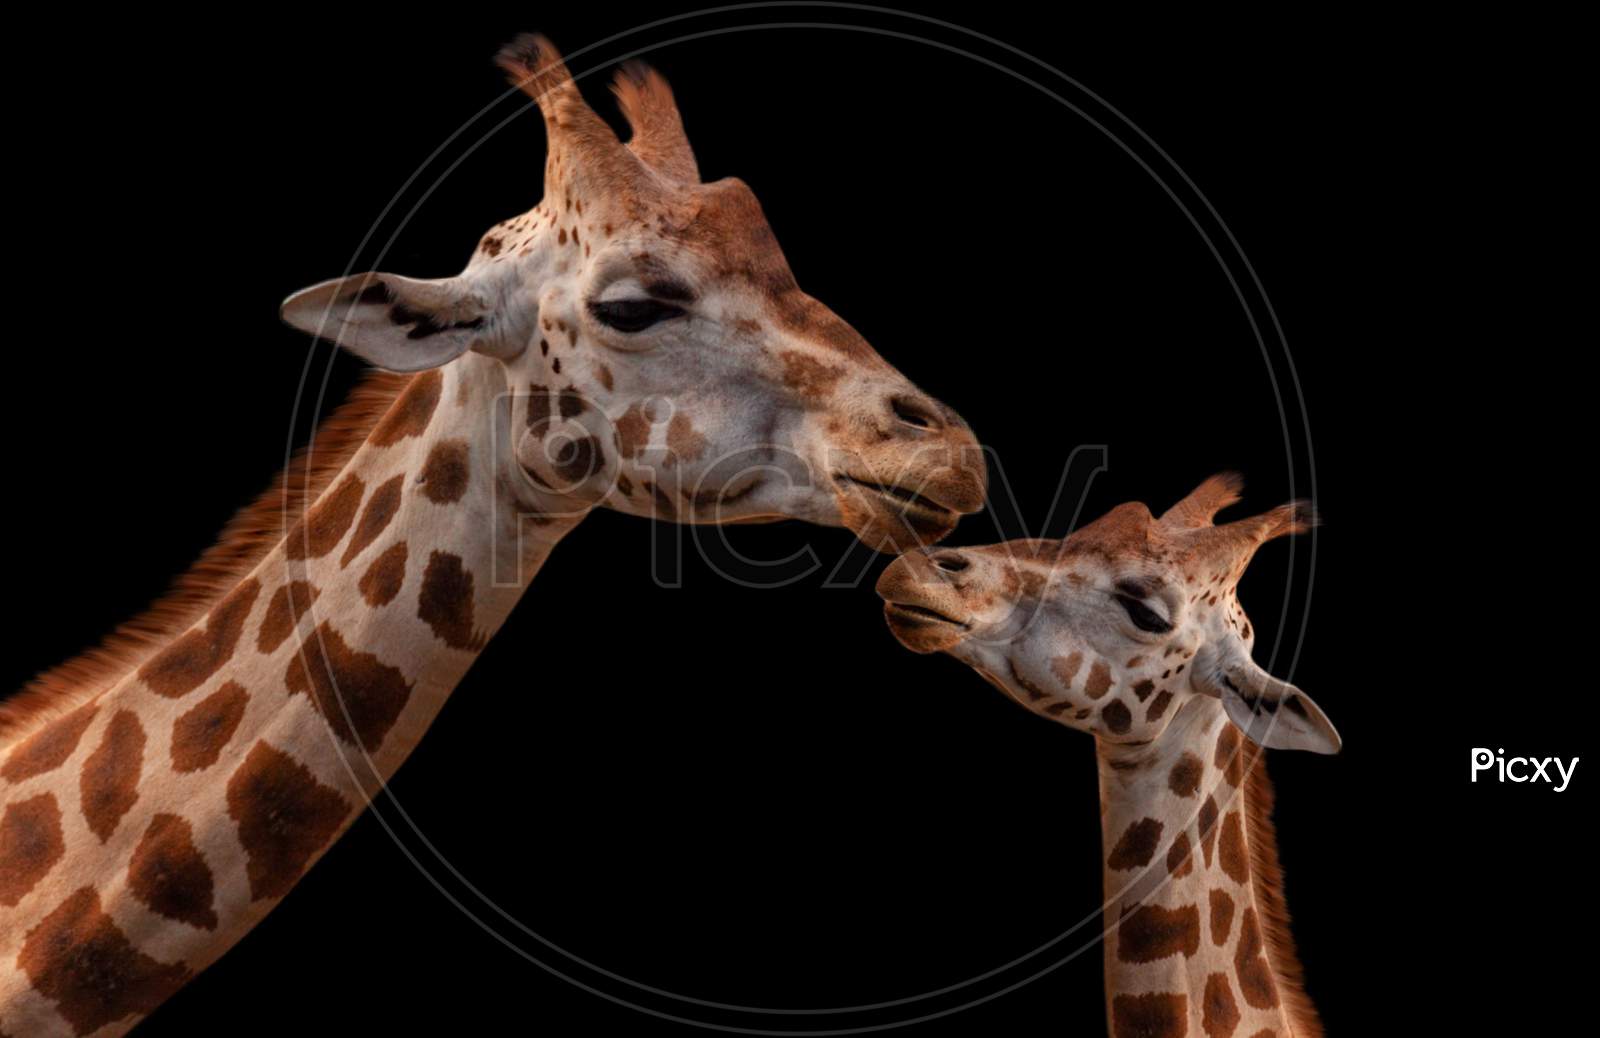 Mother And Baby Giraffe Beautiful Relationship On The Black Background